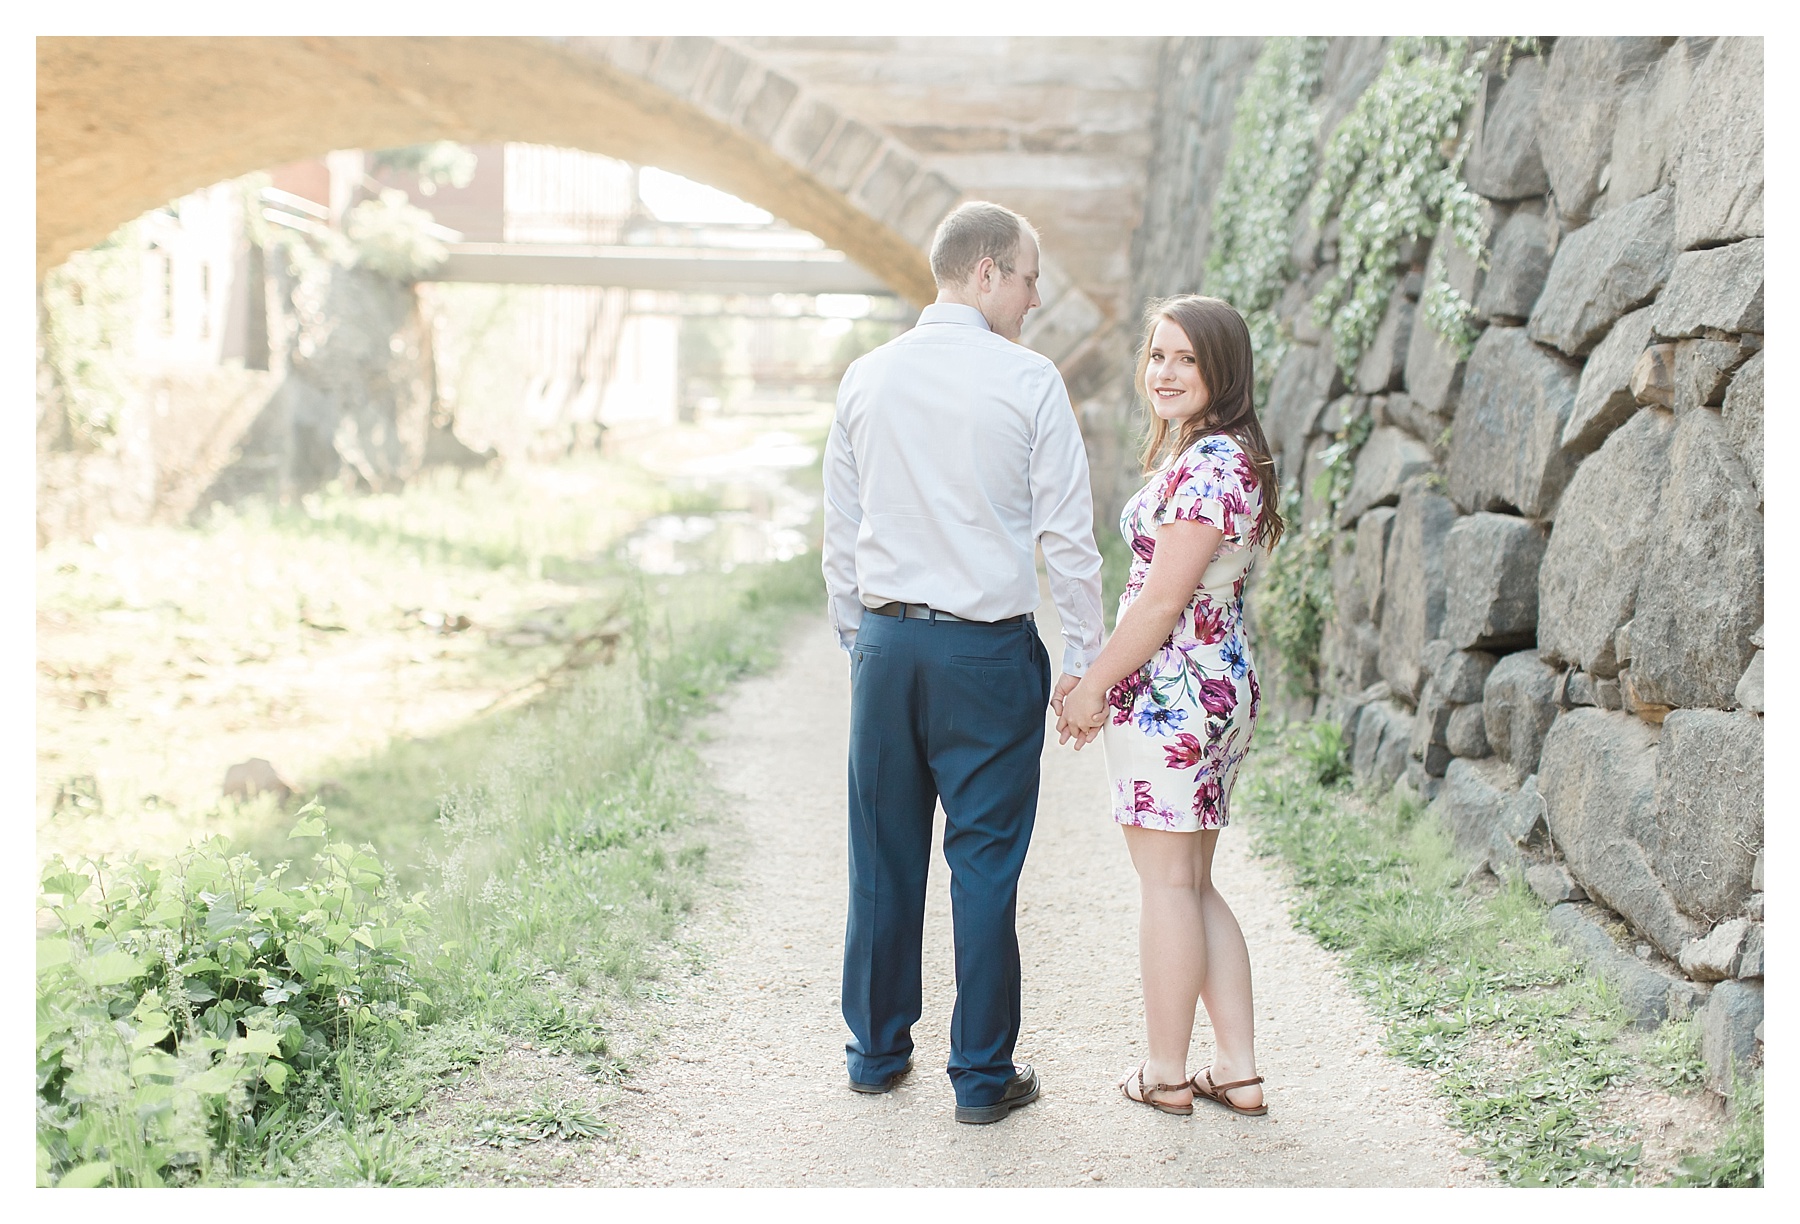 Candice Adelle Photography DC Wedding Photographer DC Georgetown Engagement_1546.jpg